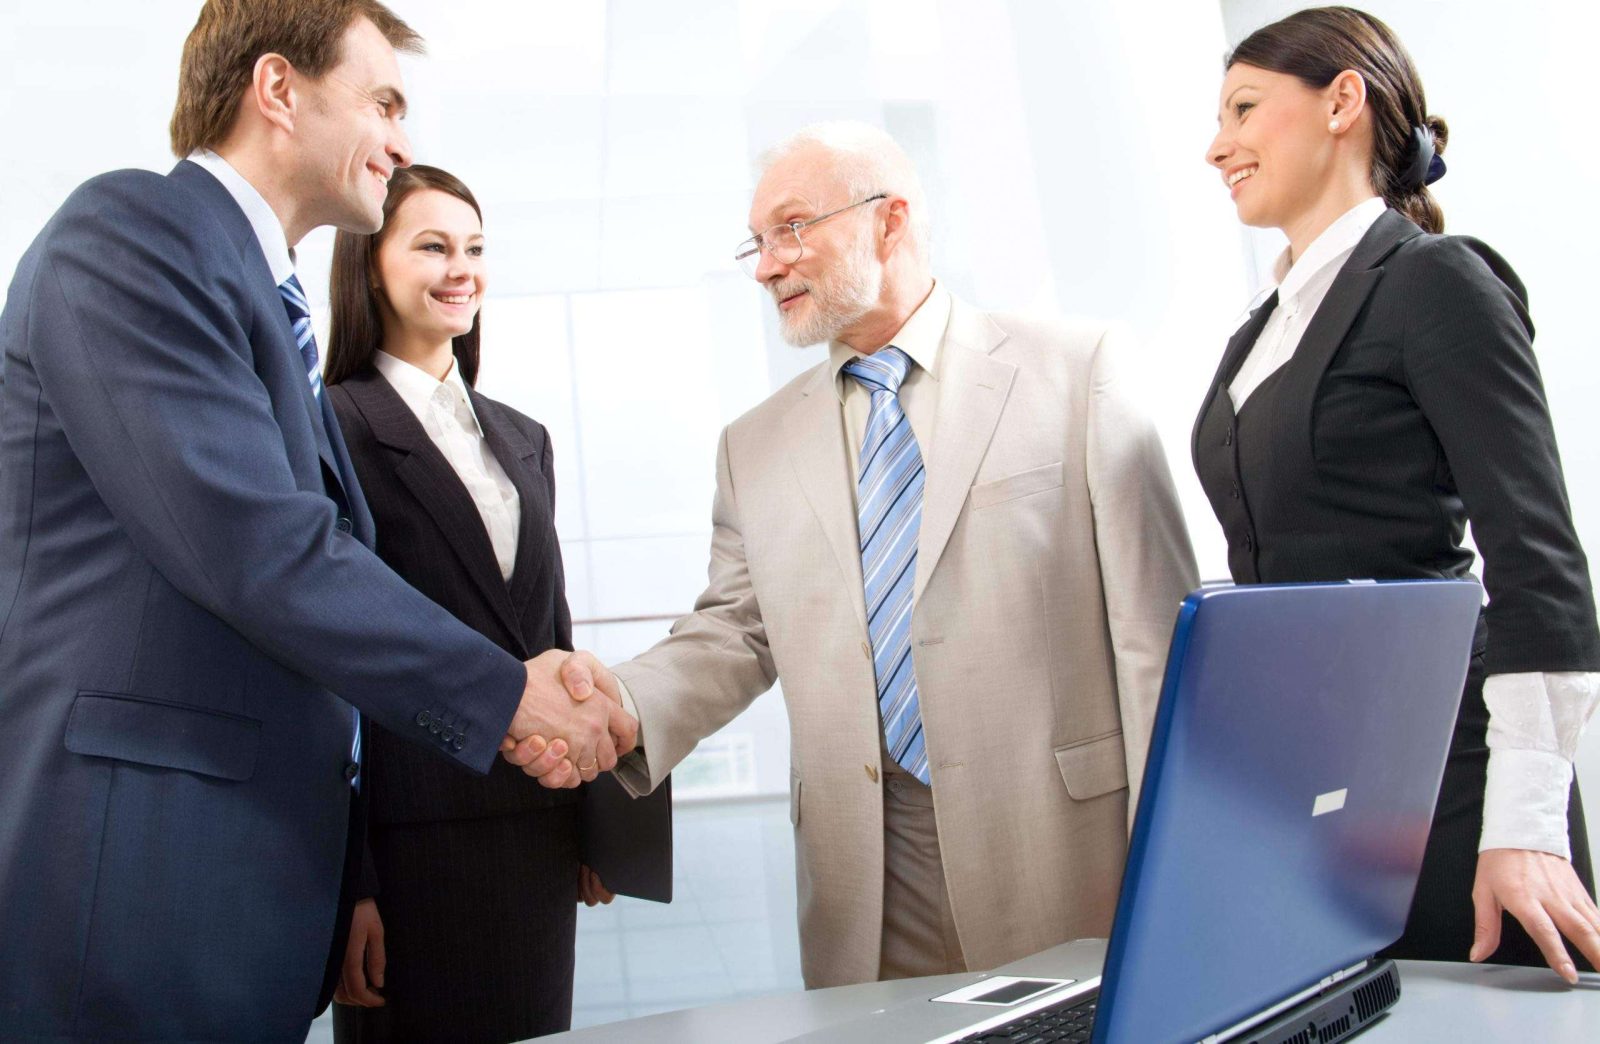 Group of four business people shaking hands in an office